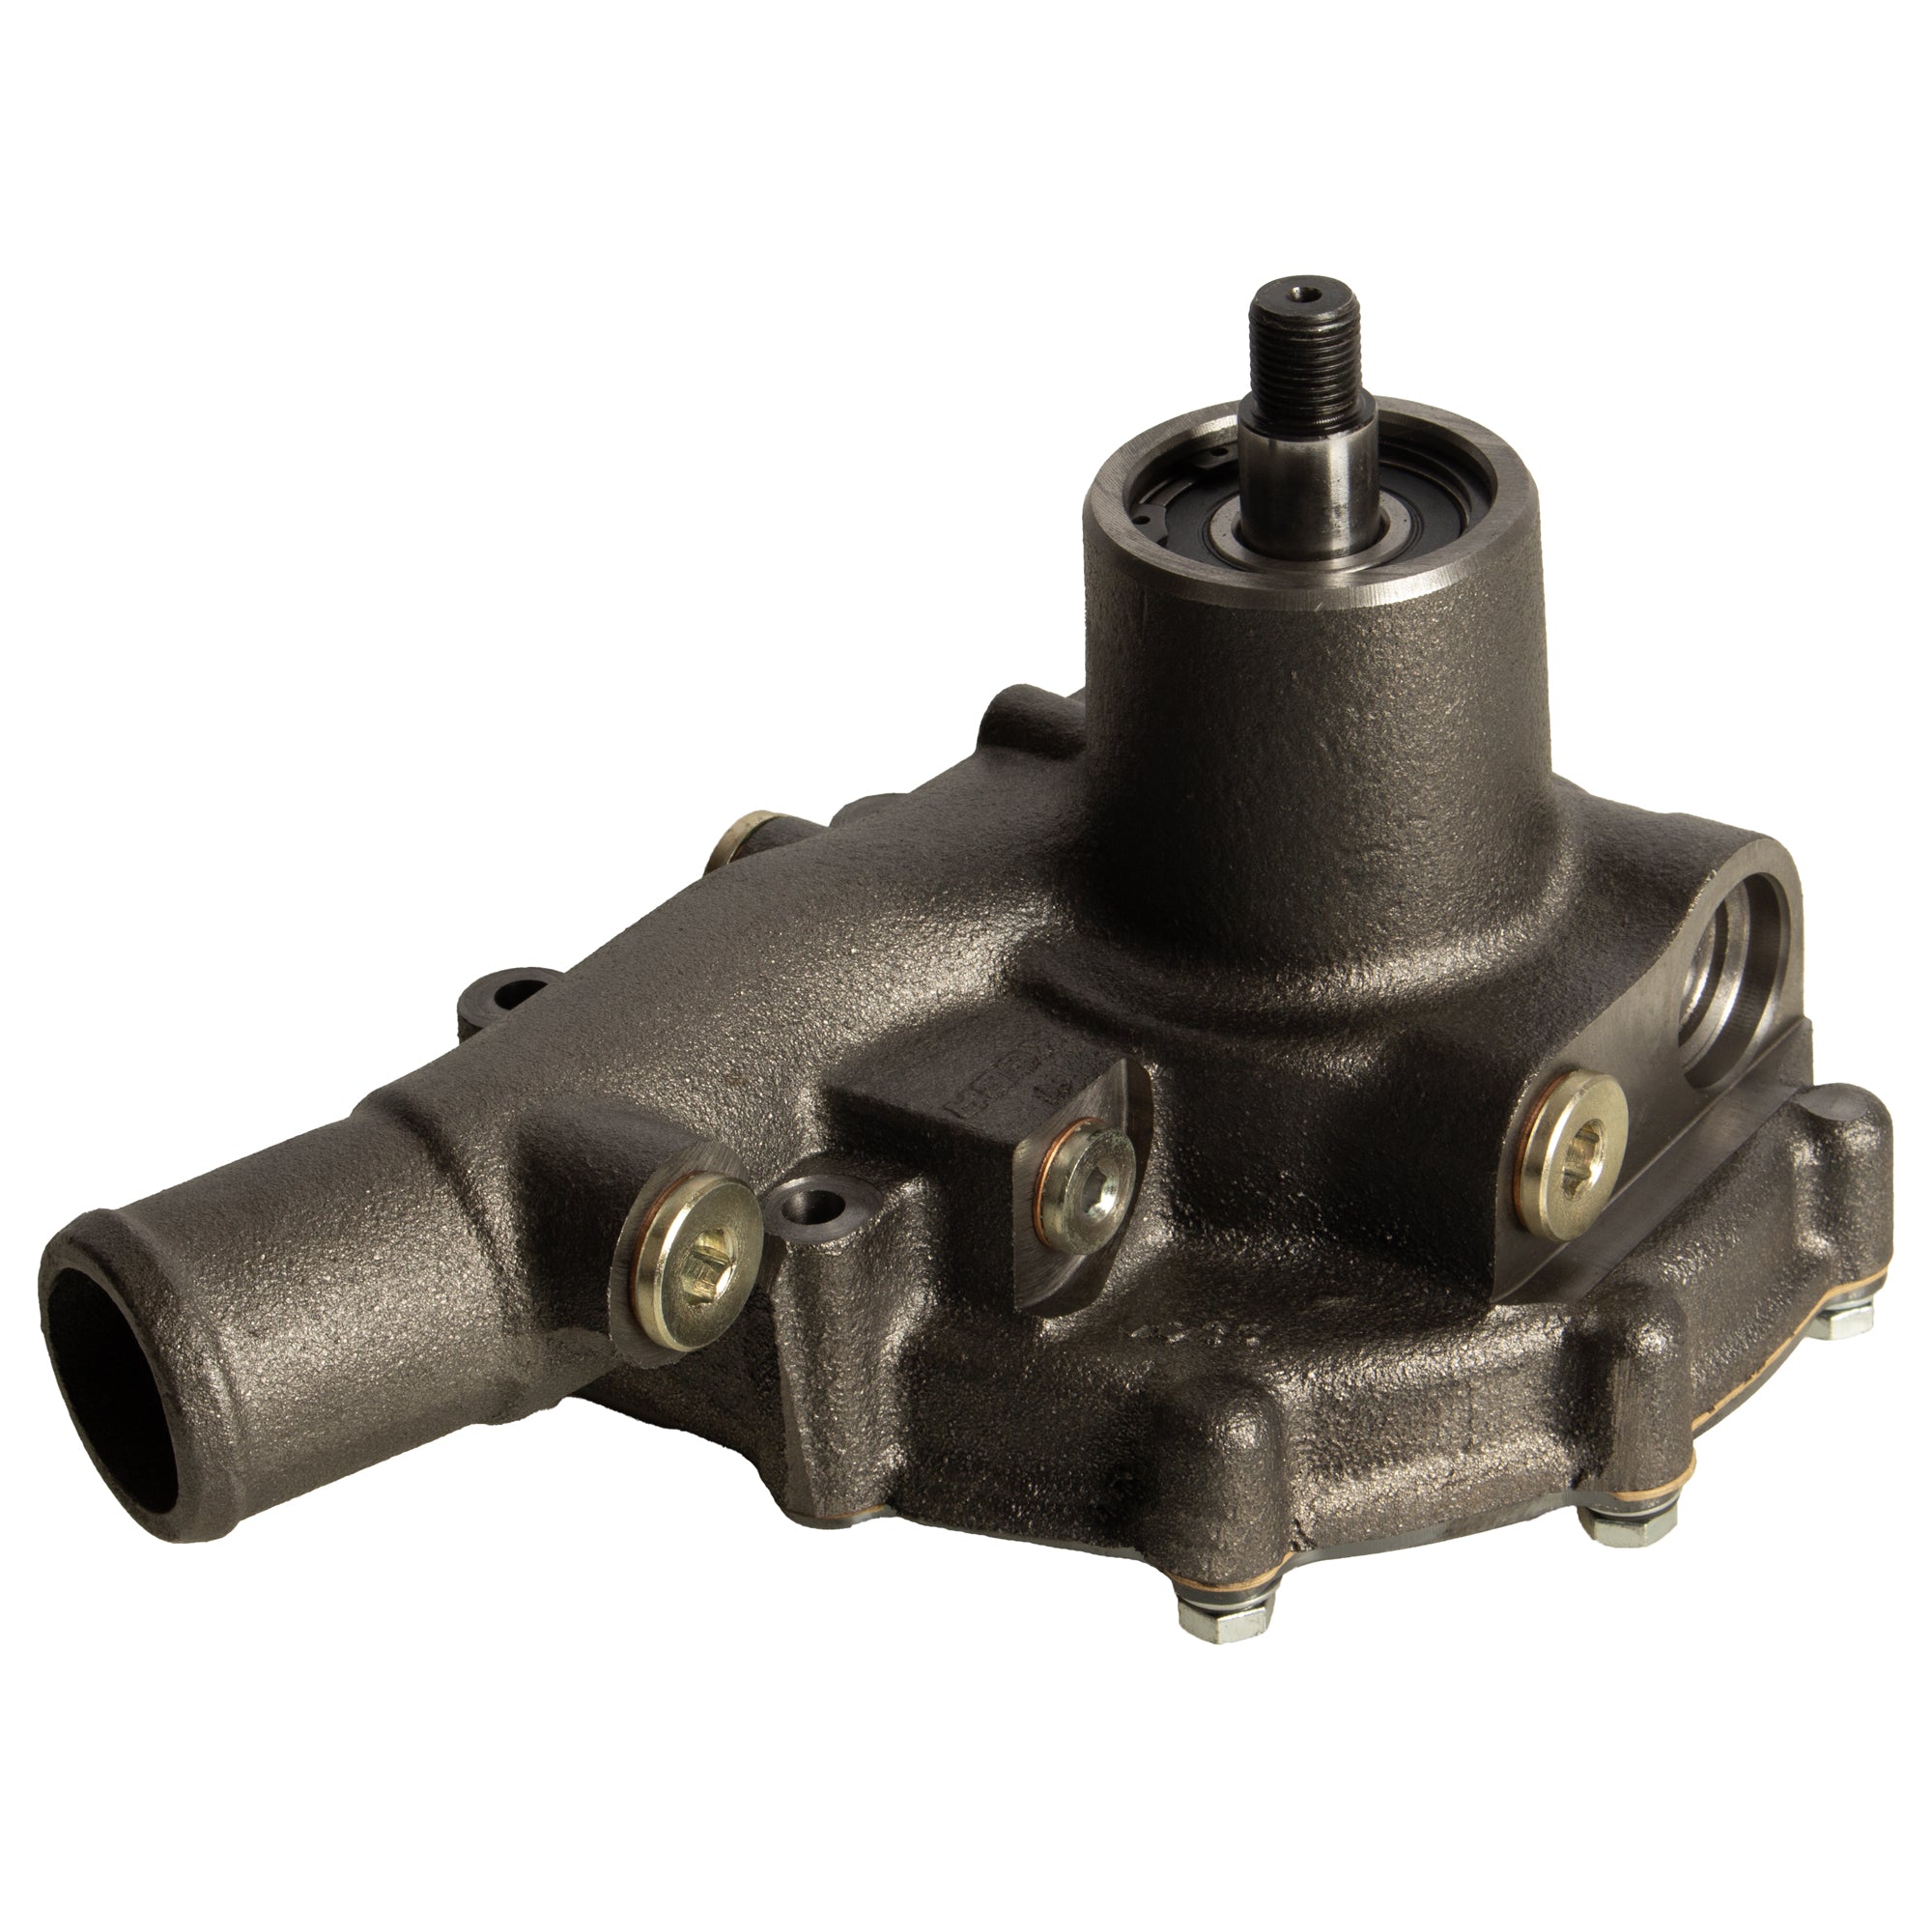 Water Pump Replacement for VALTRA/VALMET 1000 1004 1200 4700 V837091844